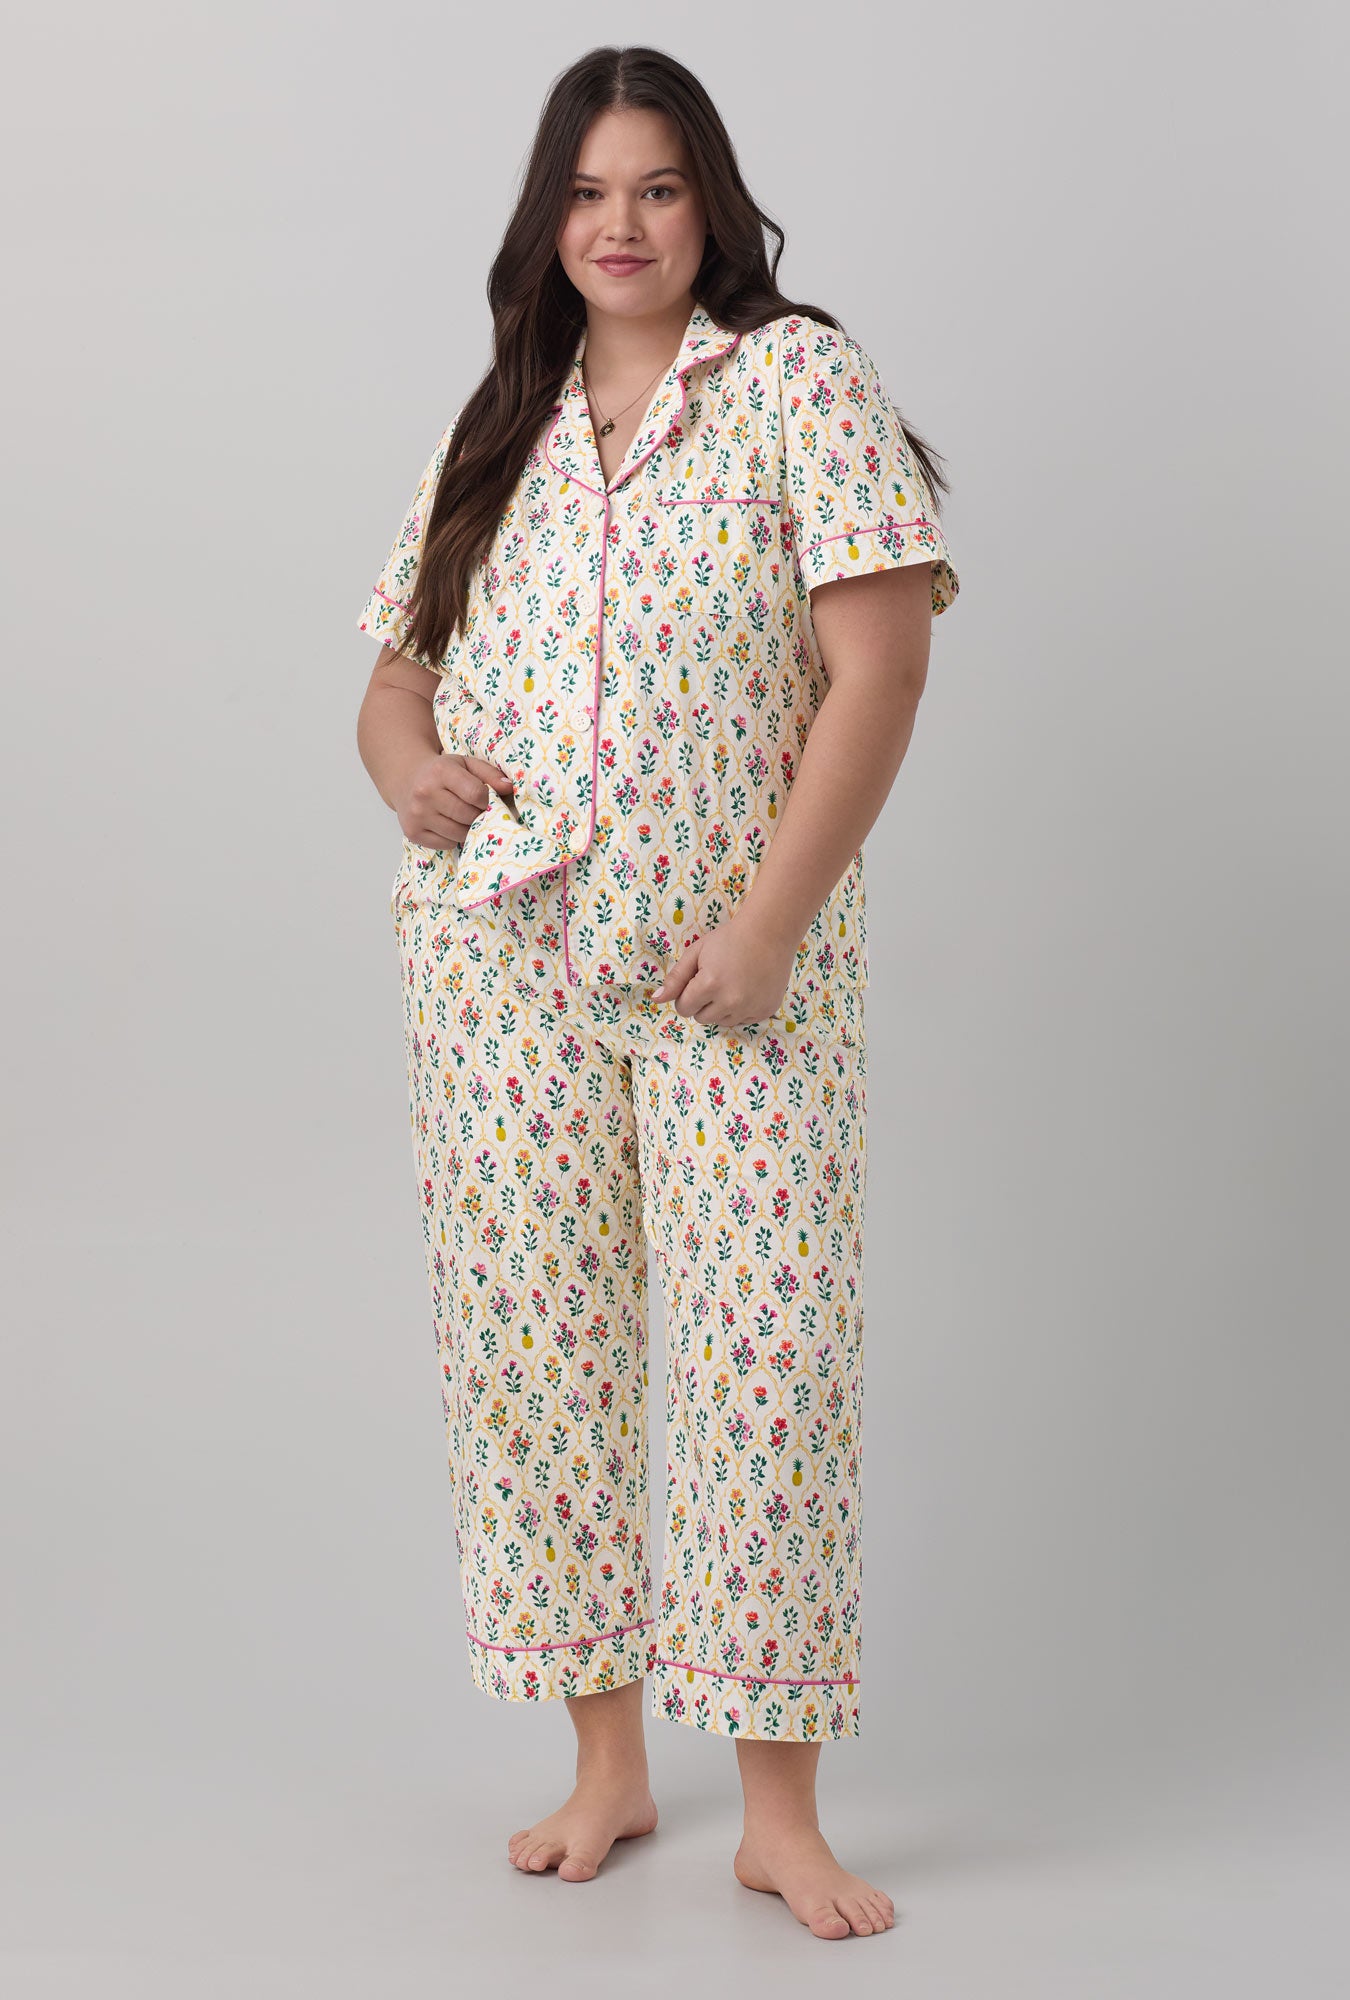 A lady wearing Short Sleeve Classic Woven Cotton Poplin Cropped PJ Set with darling floral print